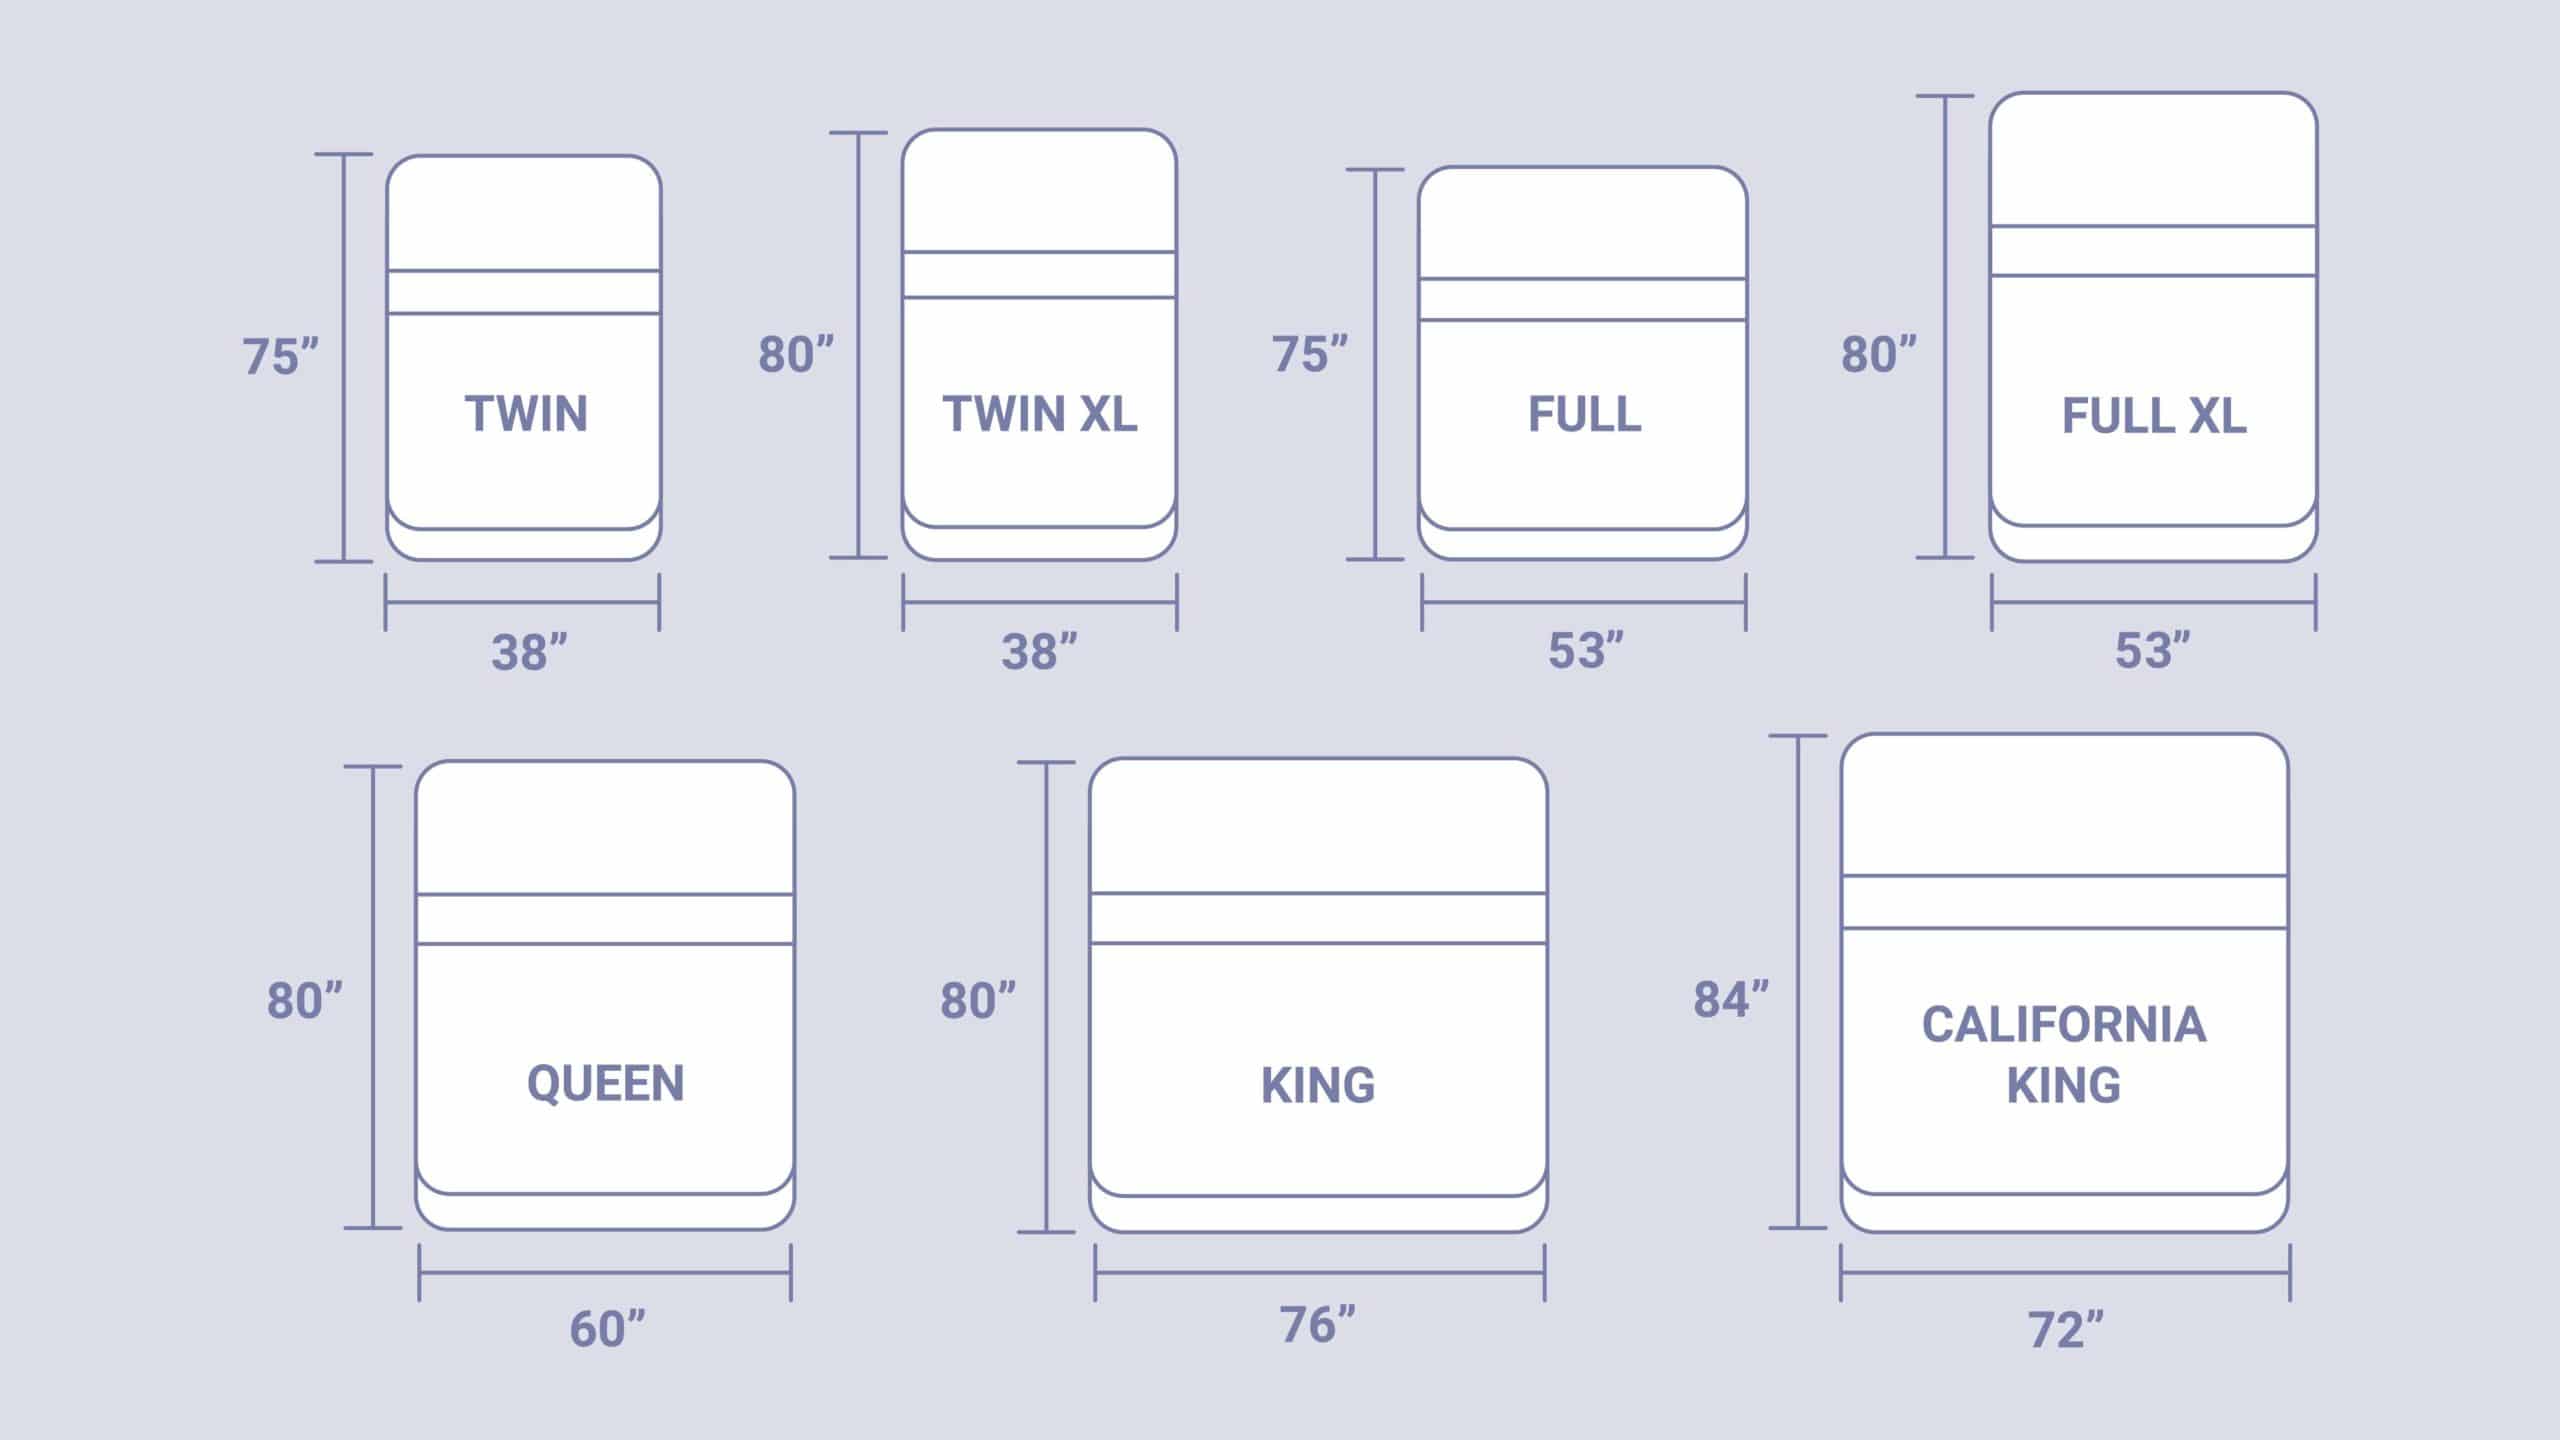 Mattress Sizes And Dimensions Guide, Bunk Bed Mattress Size Chart